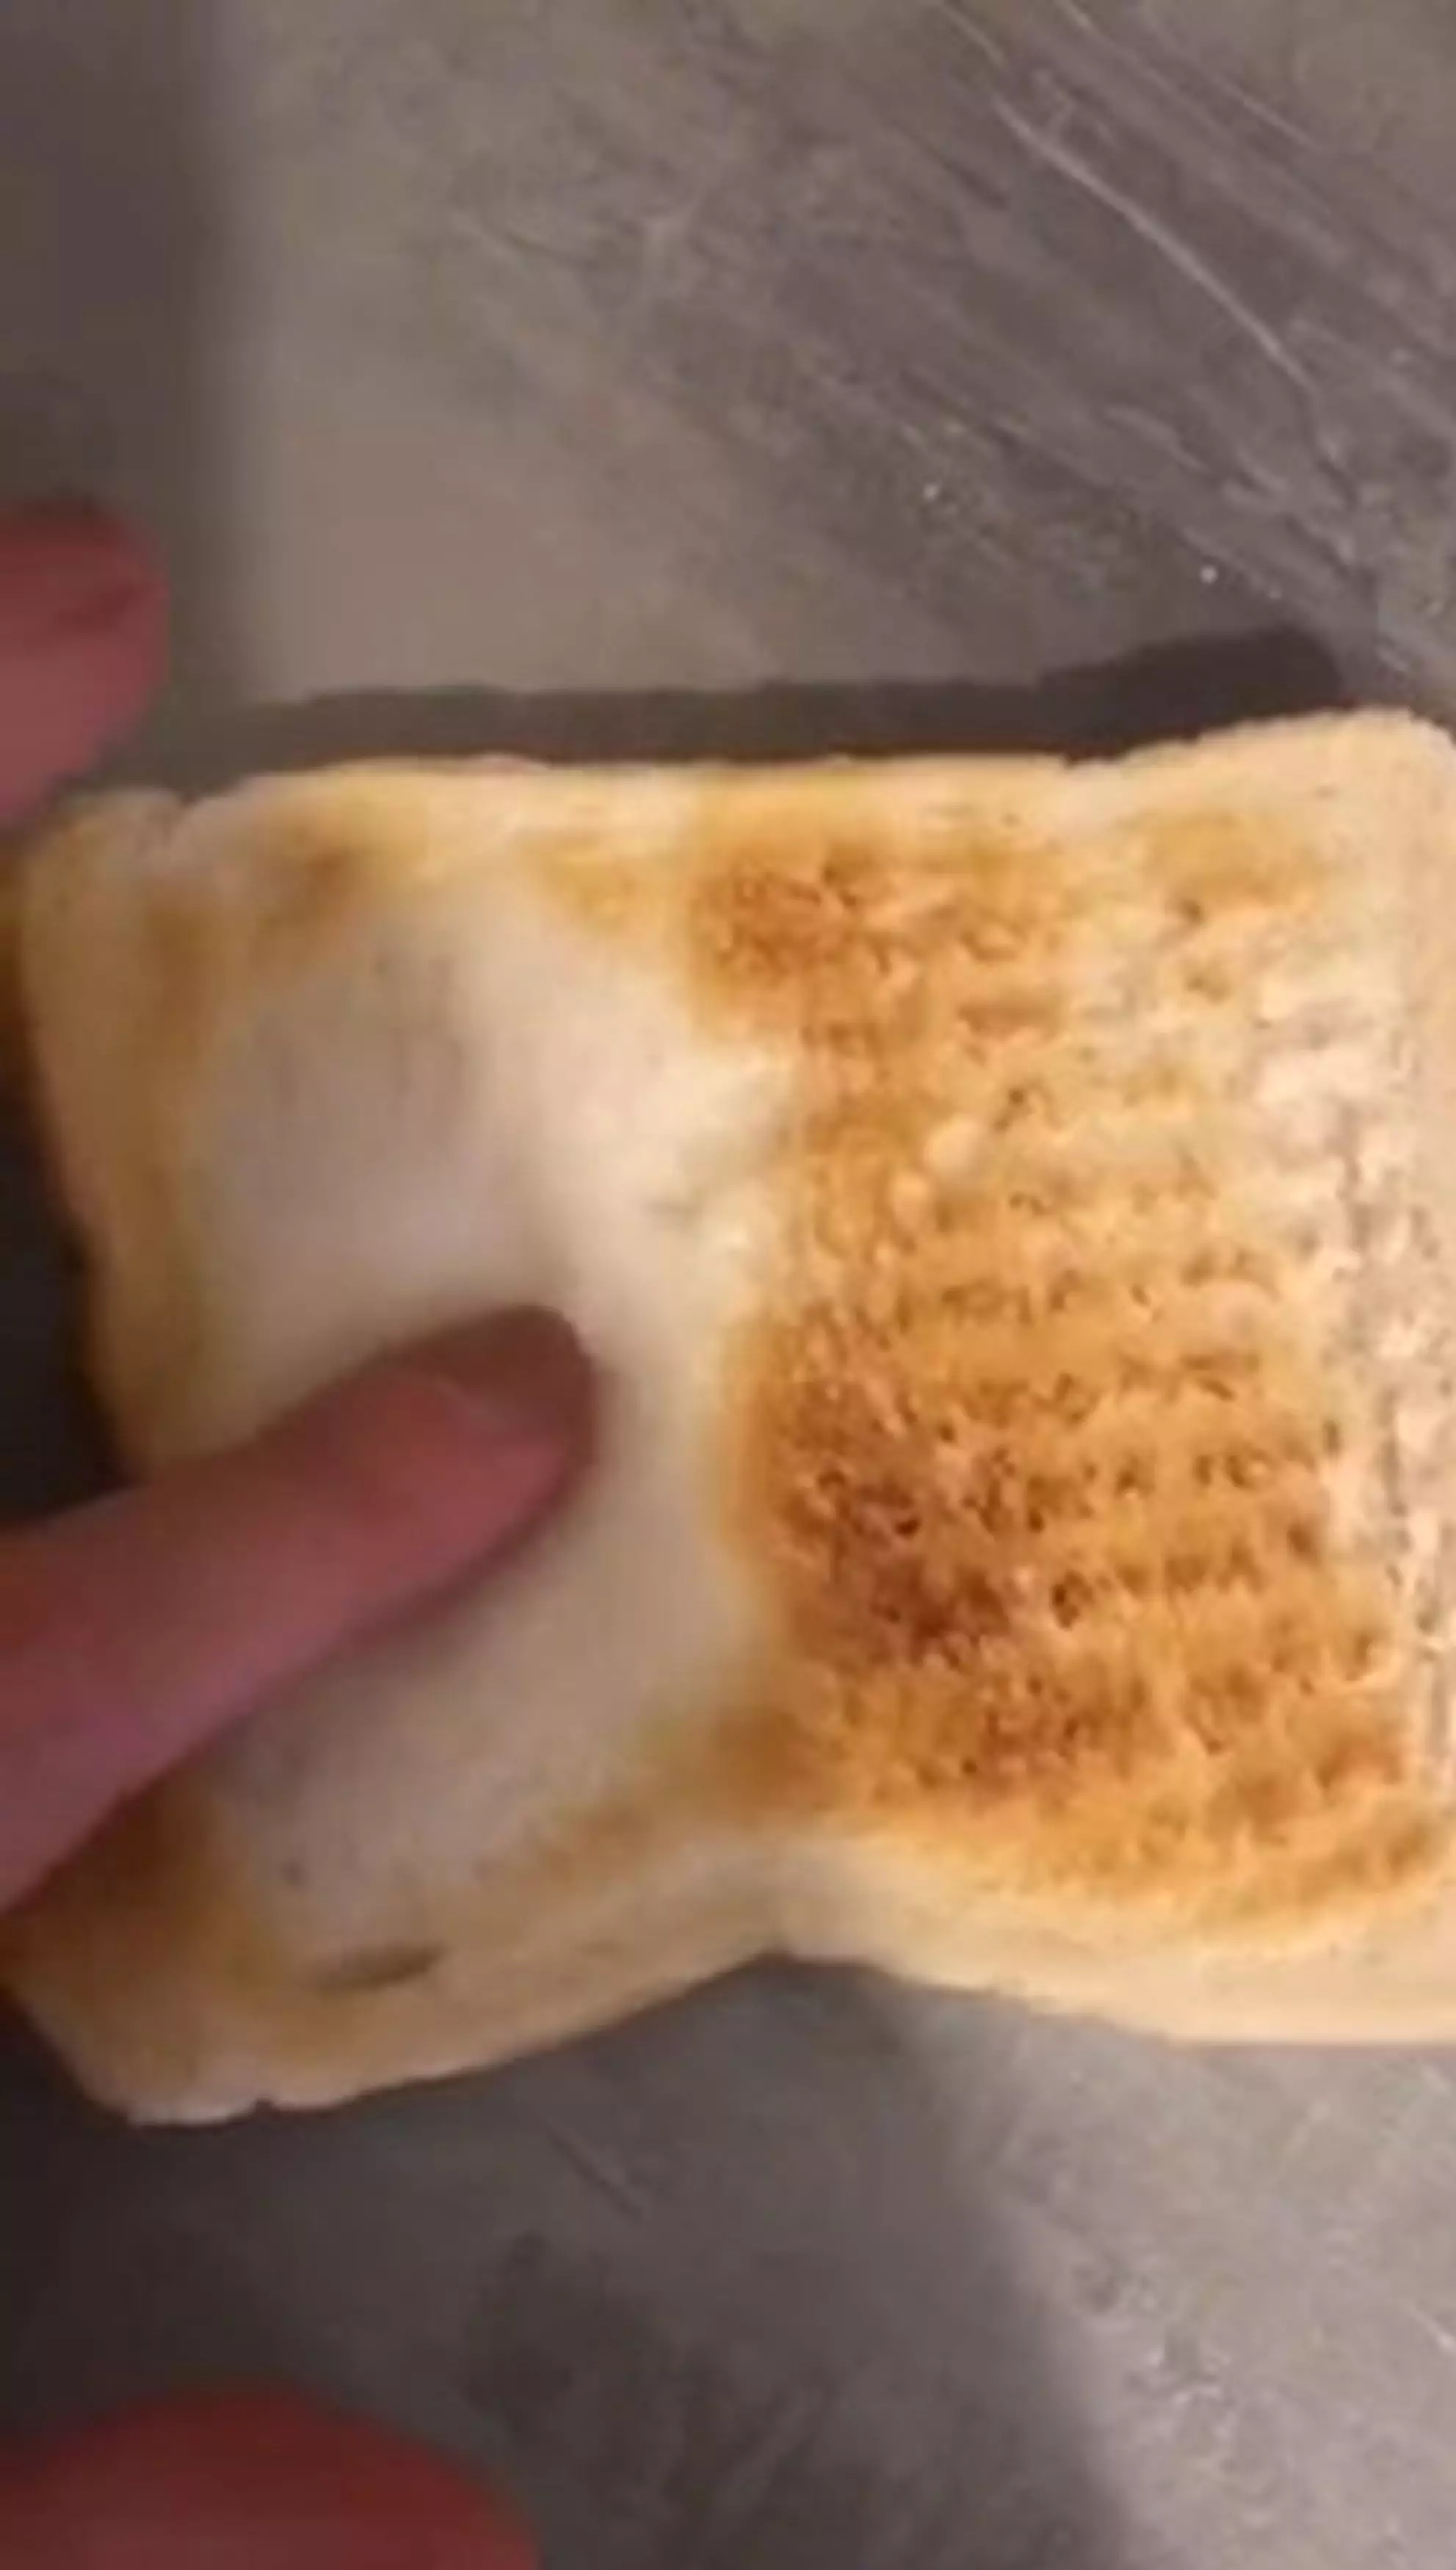 The stylist pressed the still-white side of the toast to prove it was uncooked (